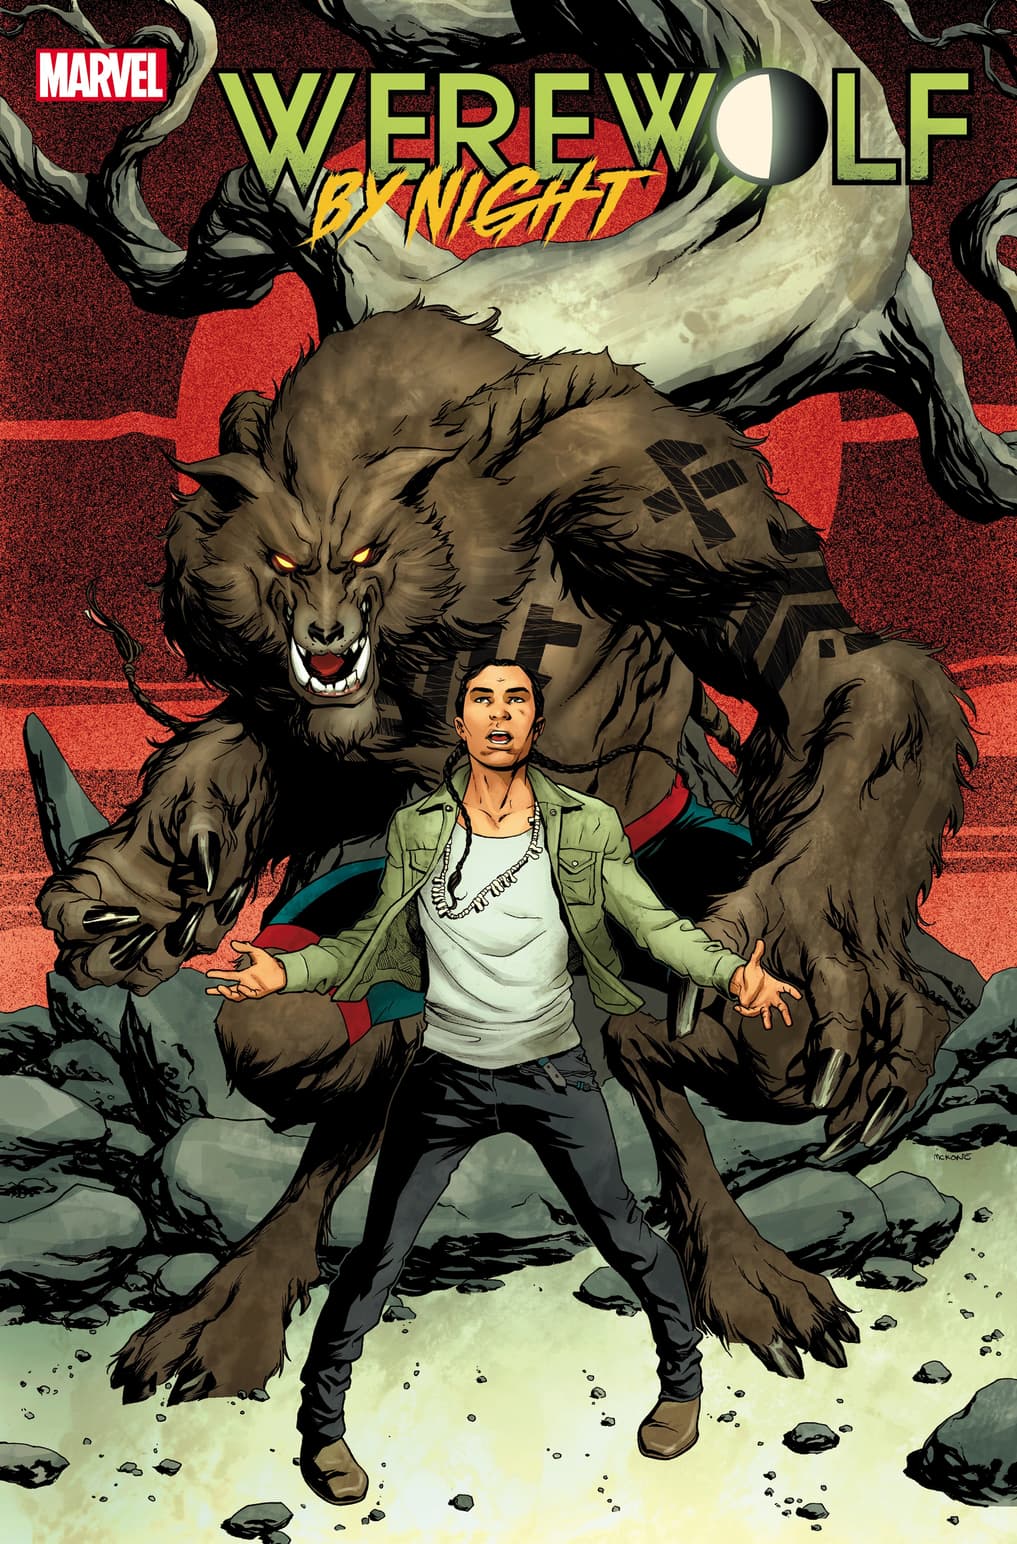 WEREWOLF BY NIGHT #1 WRITTEN BY TABOO AND BENJAMIN JACKENDOFF, ART BY SCOT EATON, COVER BY MIKE MCKONE